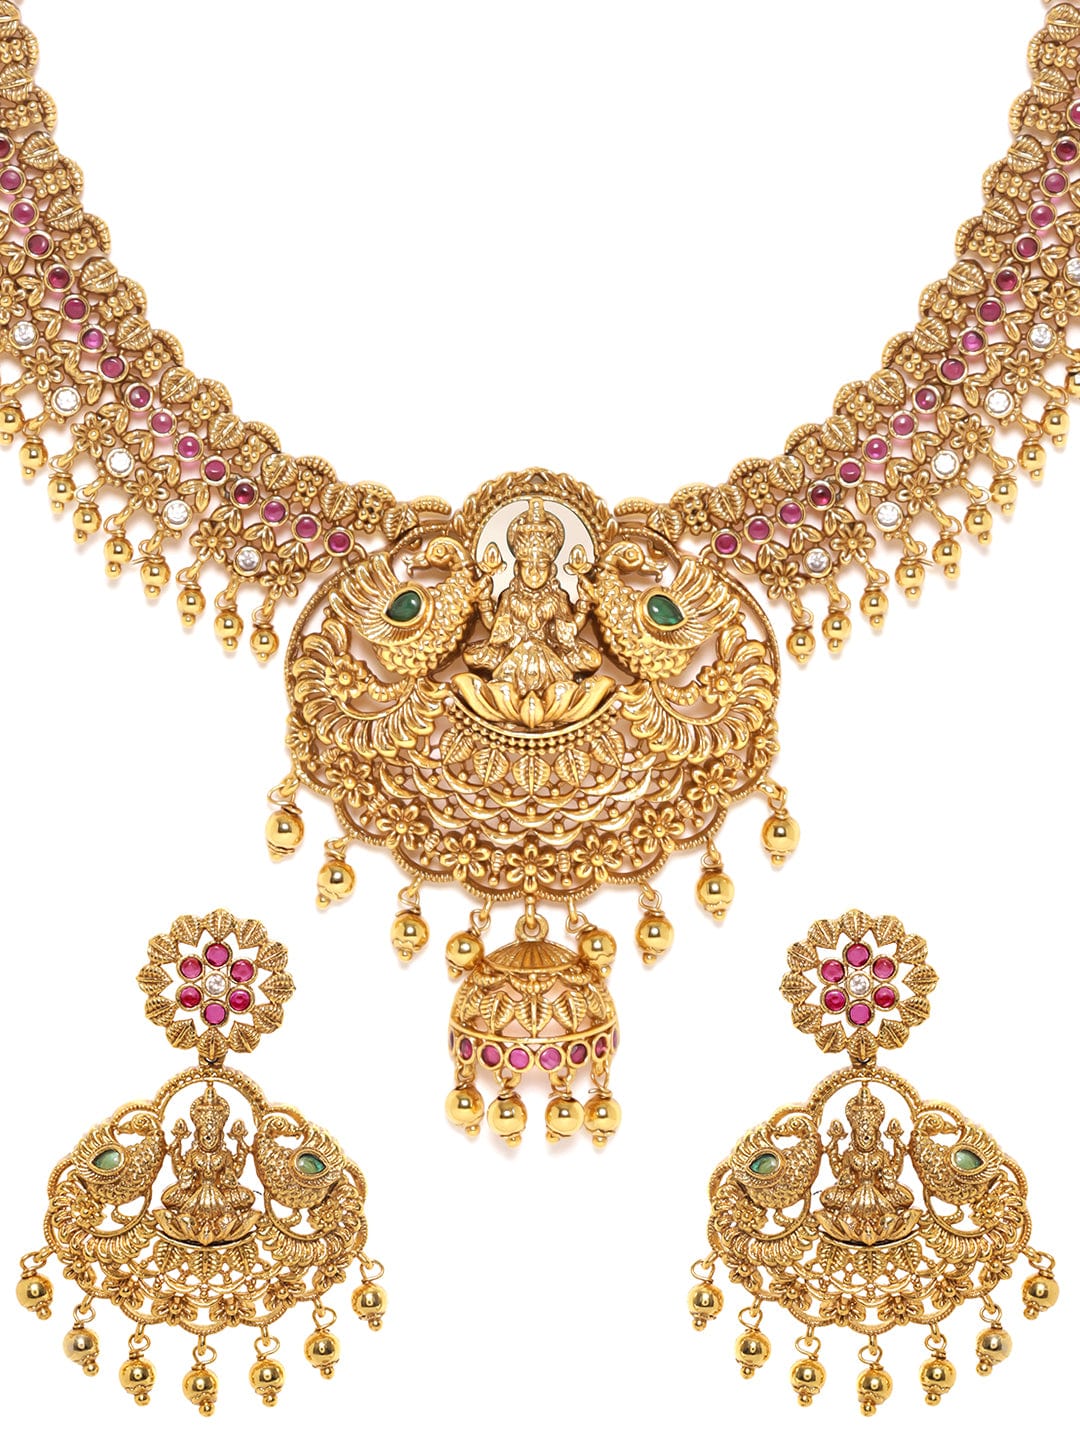 22K Gold plated Delicate handcrafted Goddess motif Lakshmi Luxury Temple Necklace Set Jewellery Sets